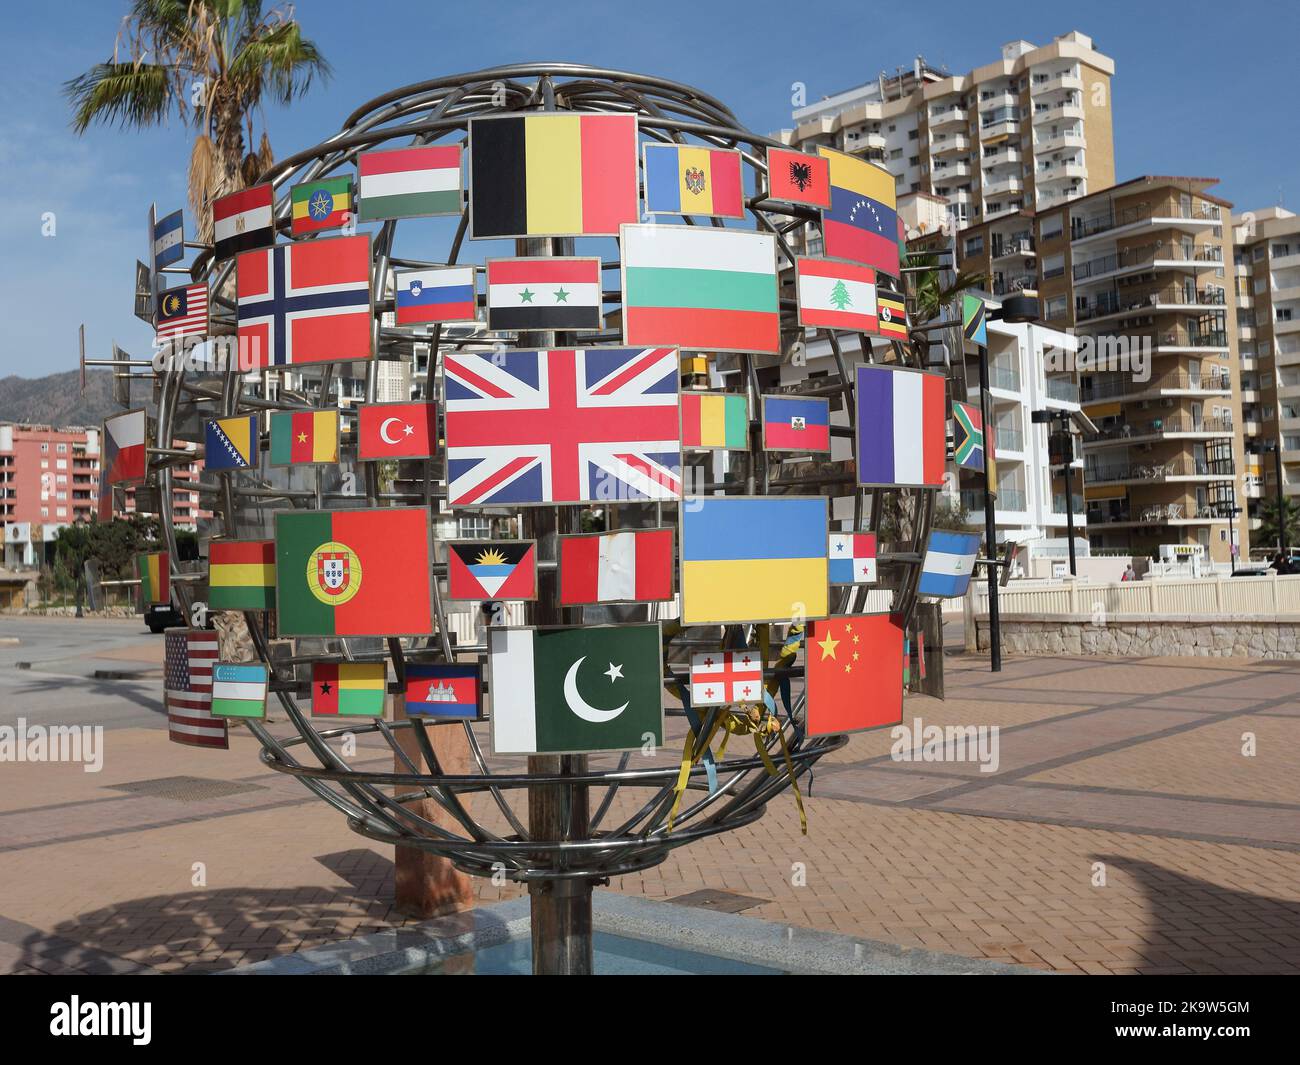 Fountain of the nations in Fuengirola, Malaga province, Andalusia, Spain. Stock Photo